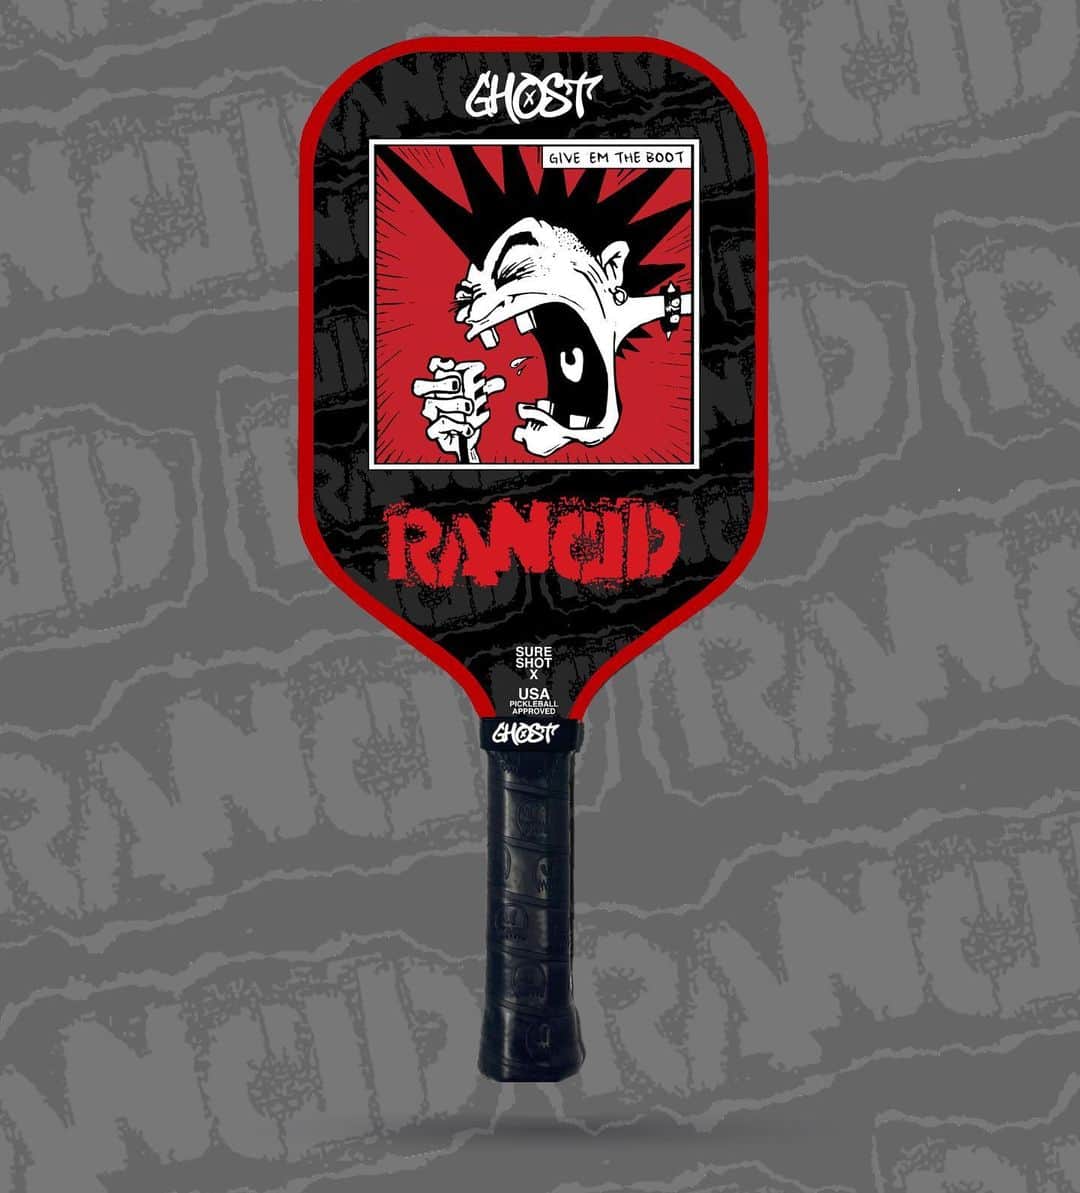 Rancidのインスタグラム：「Worlds collide! Pre-order our @rancid x @ghostpickleball paddle now!!! *Link in bio. I’ve been addicted to pickleball for years now but the gear was so bland. So I created Ghost Pickleball! My passion project, DIY brand merging inspiration from my life of music & skateboarding into pro quality pickleball gear. My collabs with bands had to begin with us. For all of you other pickleball fans… jump on this now! For those who haven’t tried it yet, let’s go! - Branden Steineckert ghostpickleballshop.com “paddles / collabs” #GhostPickleball」